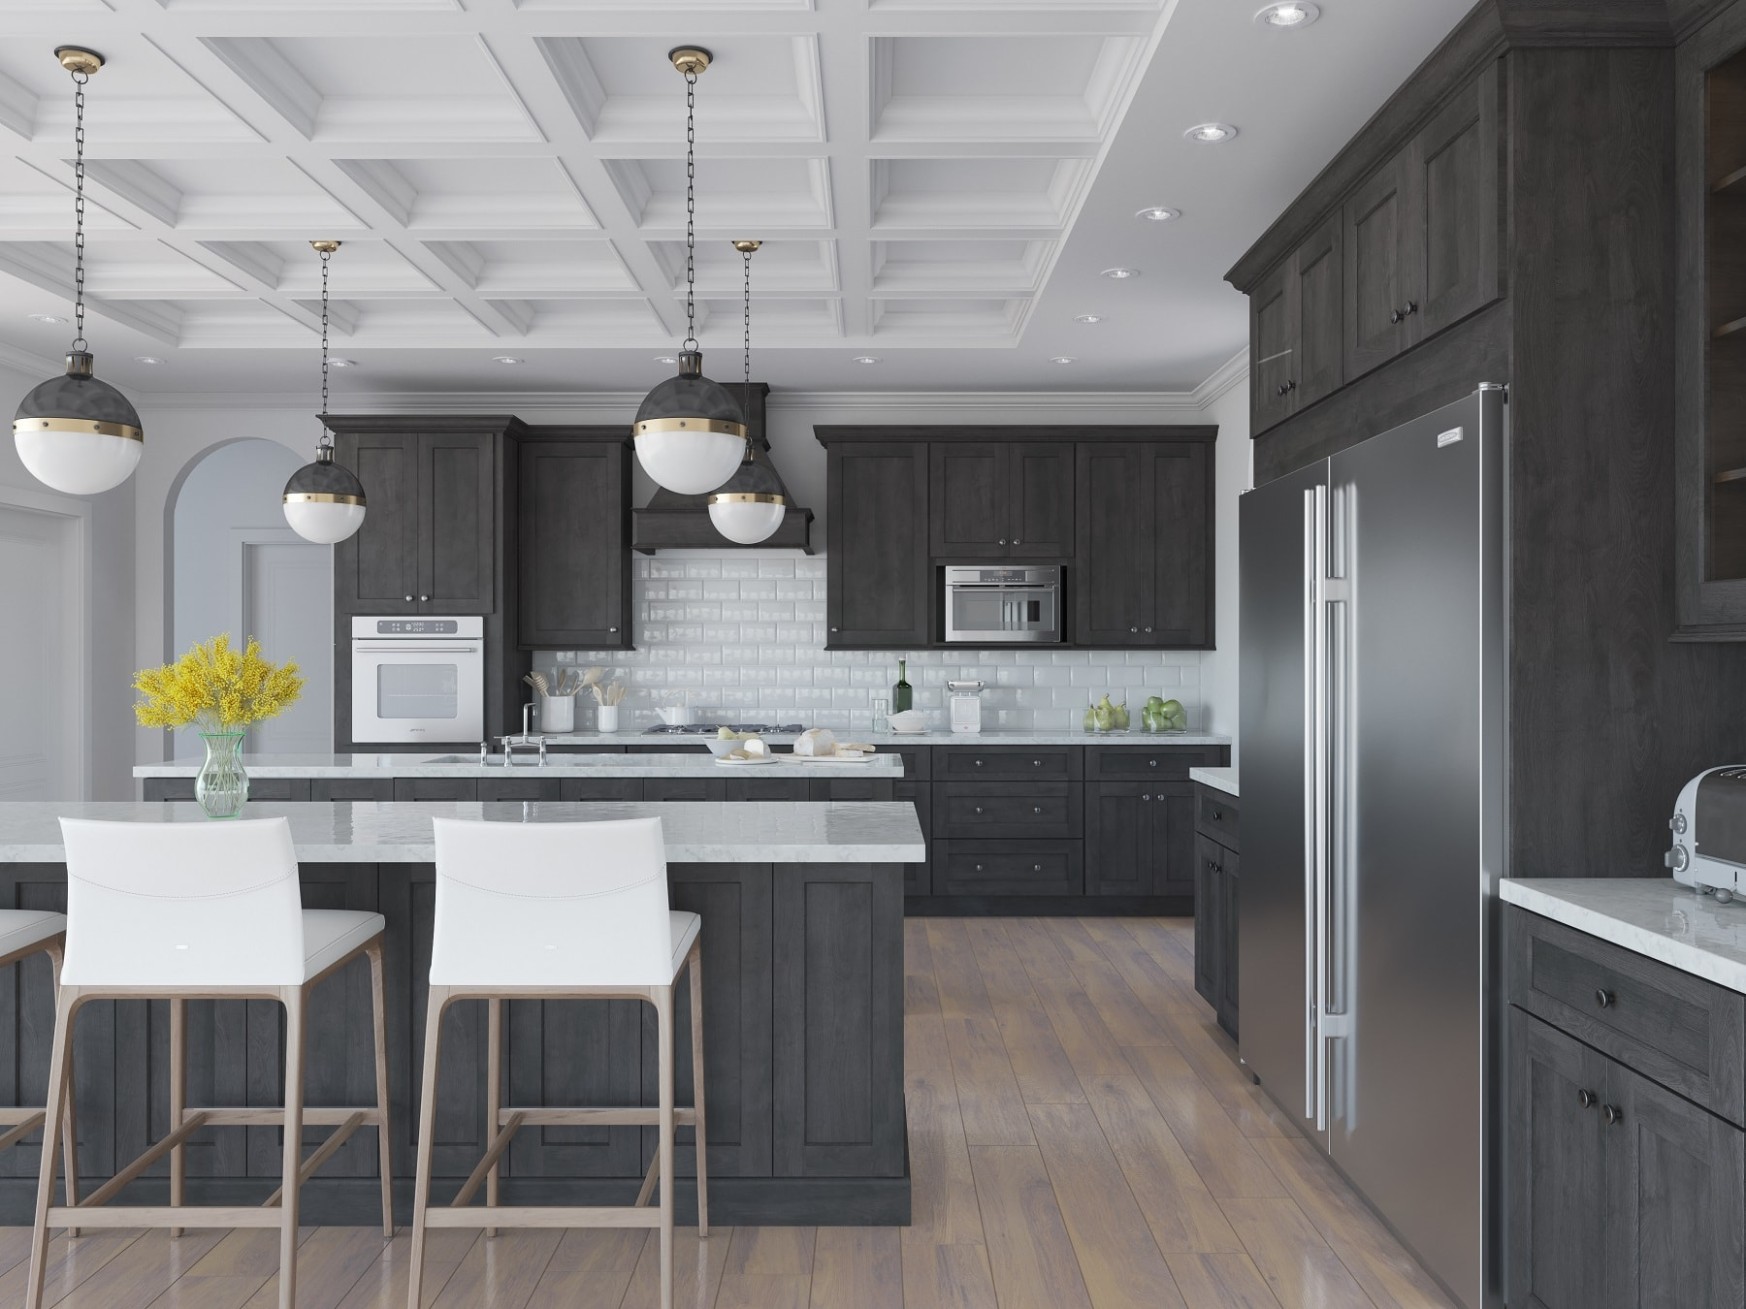 Color Me Cabinet – Hottest Trends in Kitchen Cabinet Color Ideas  - what is the most popular color for kitchen cabinets 2018?